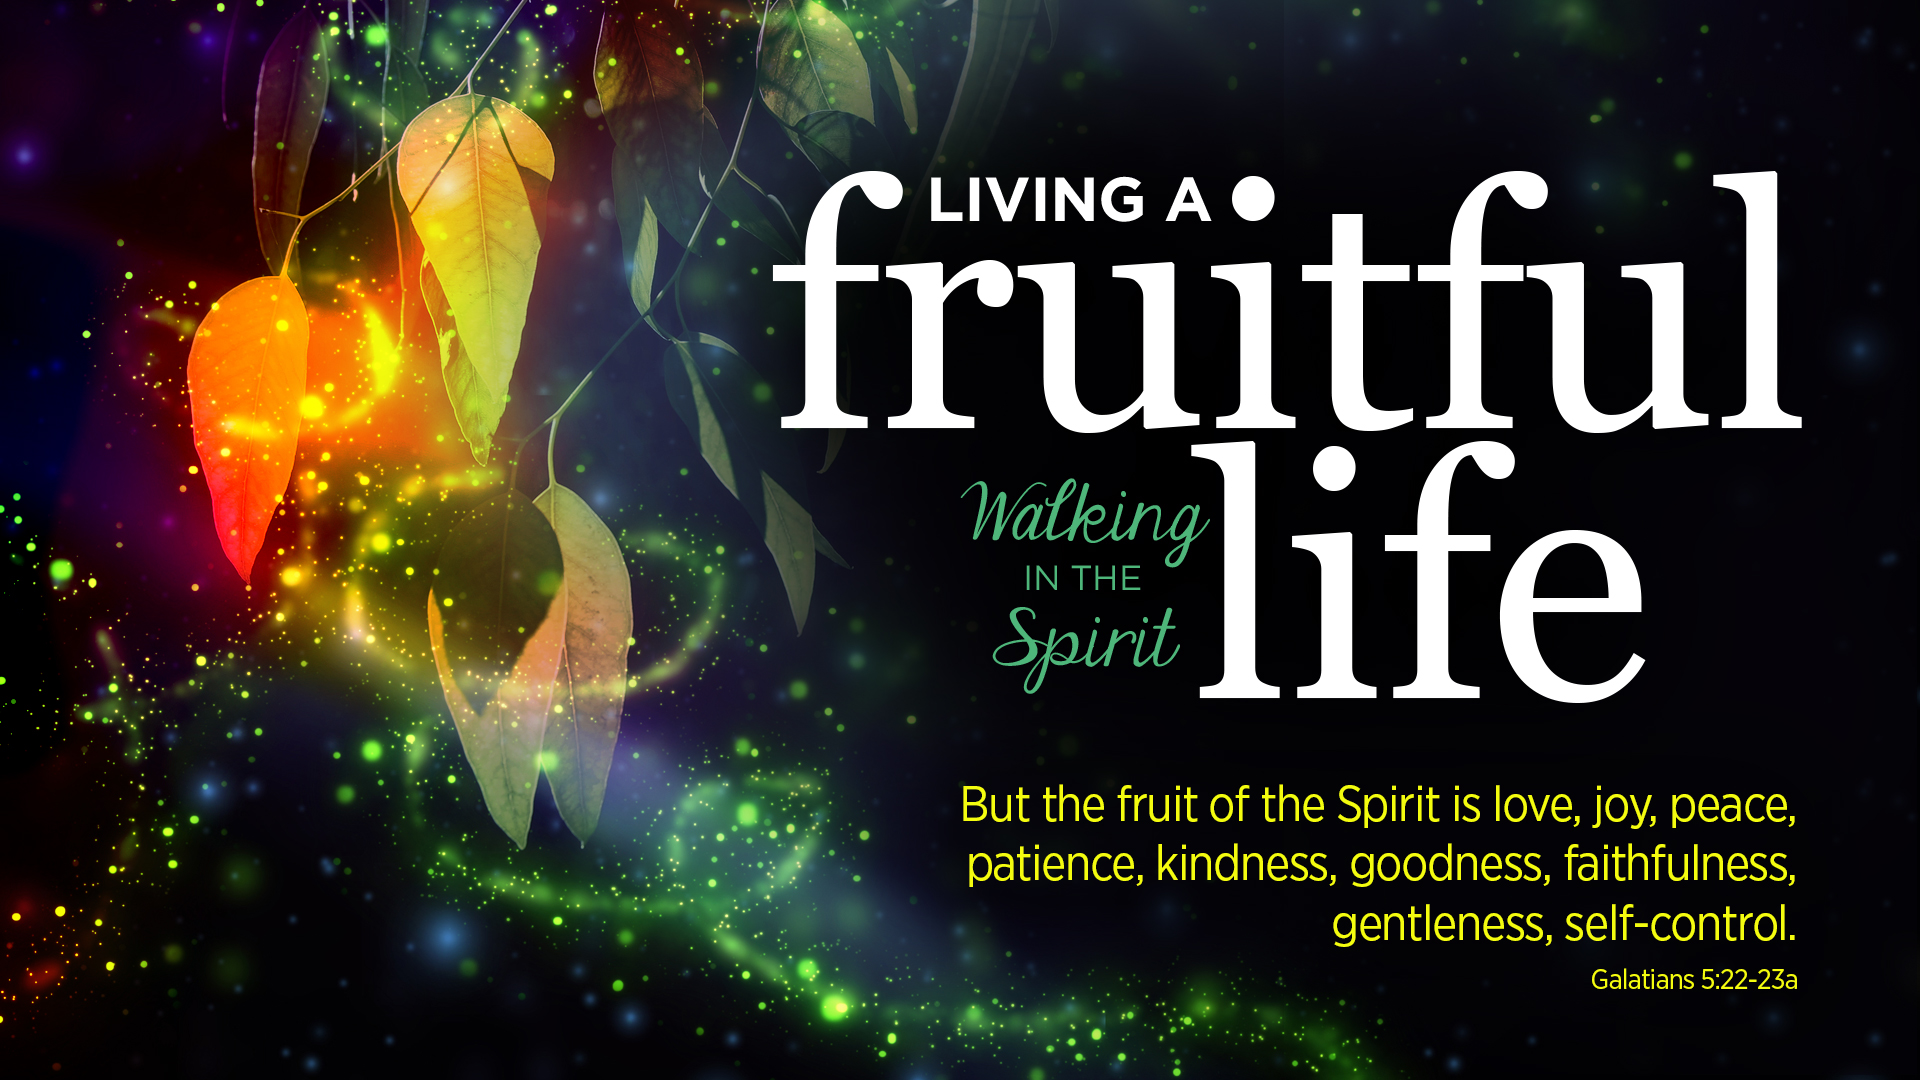 fruitful journey meaning